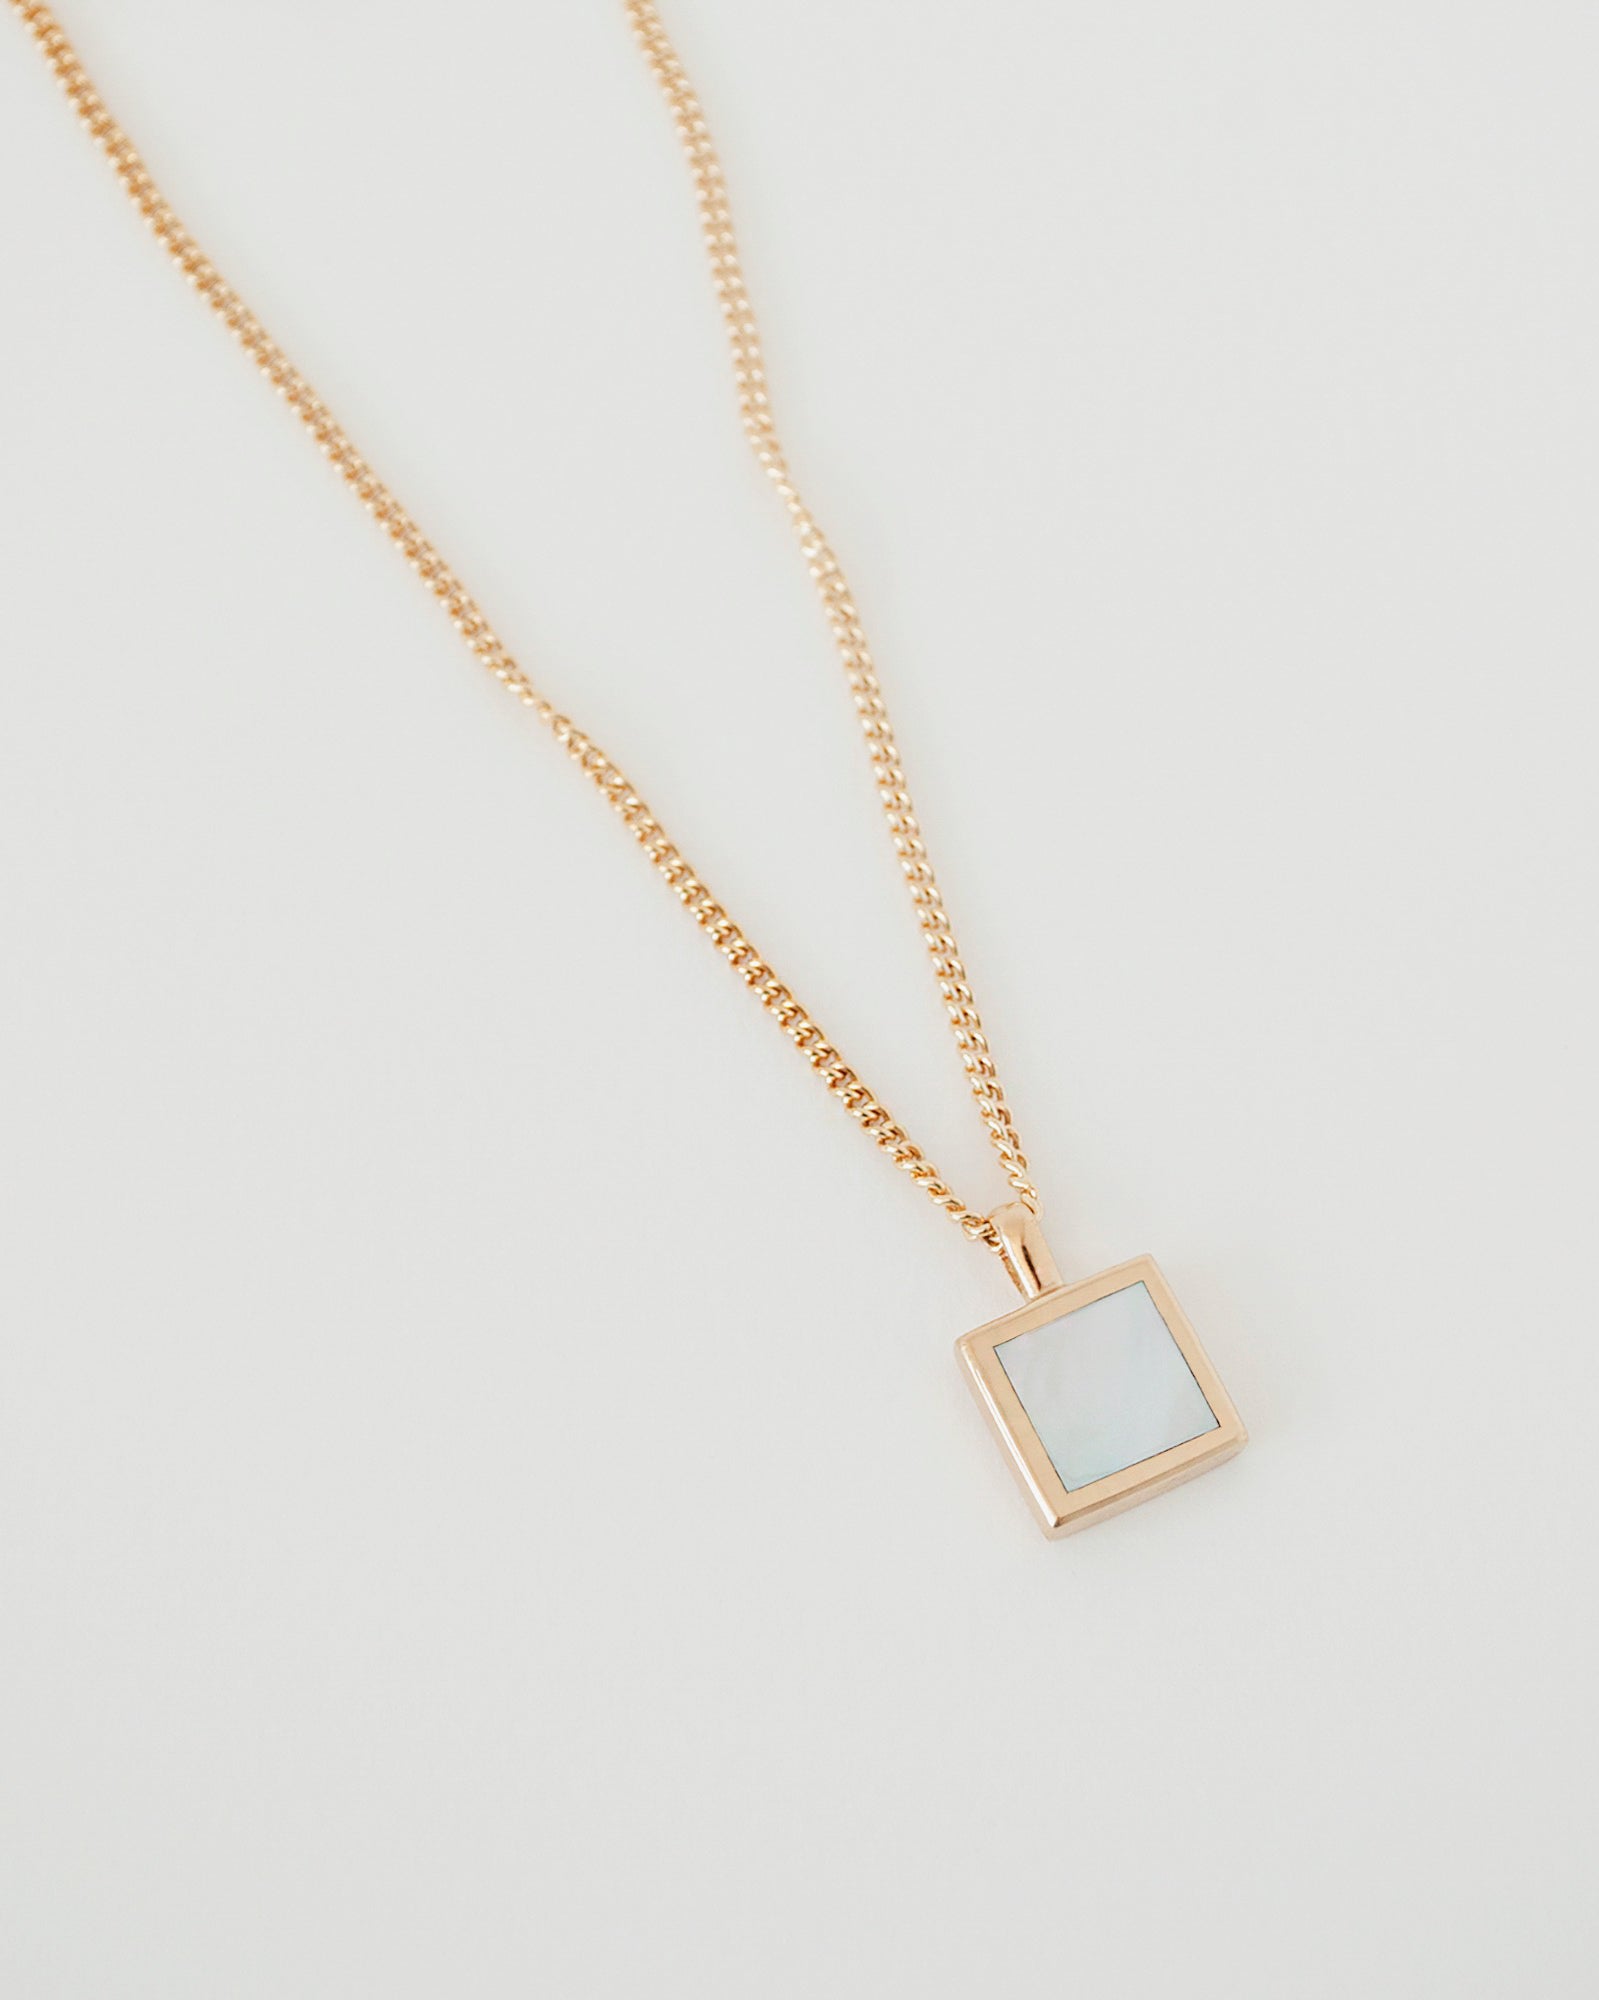 GALACTIC NECKLACE | MOTHER OF PEARL